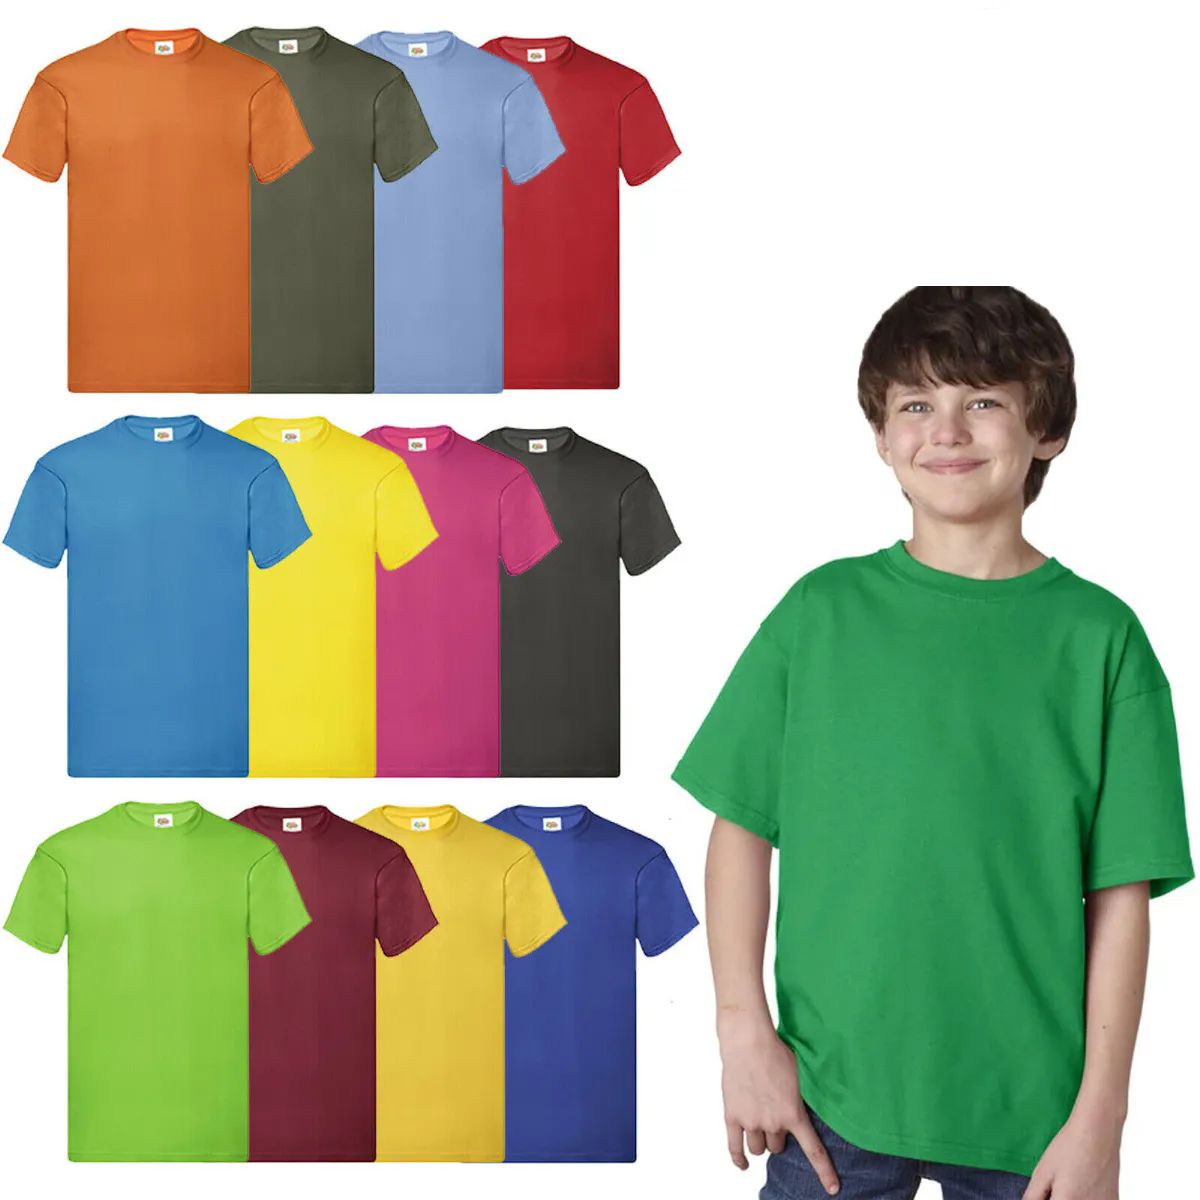 72 Pieces of Billion Hats Kids Youth Cotton Assorted Colors T Shirts Size M